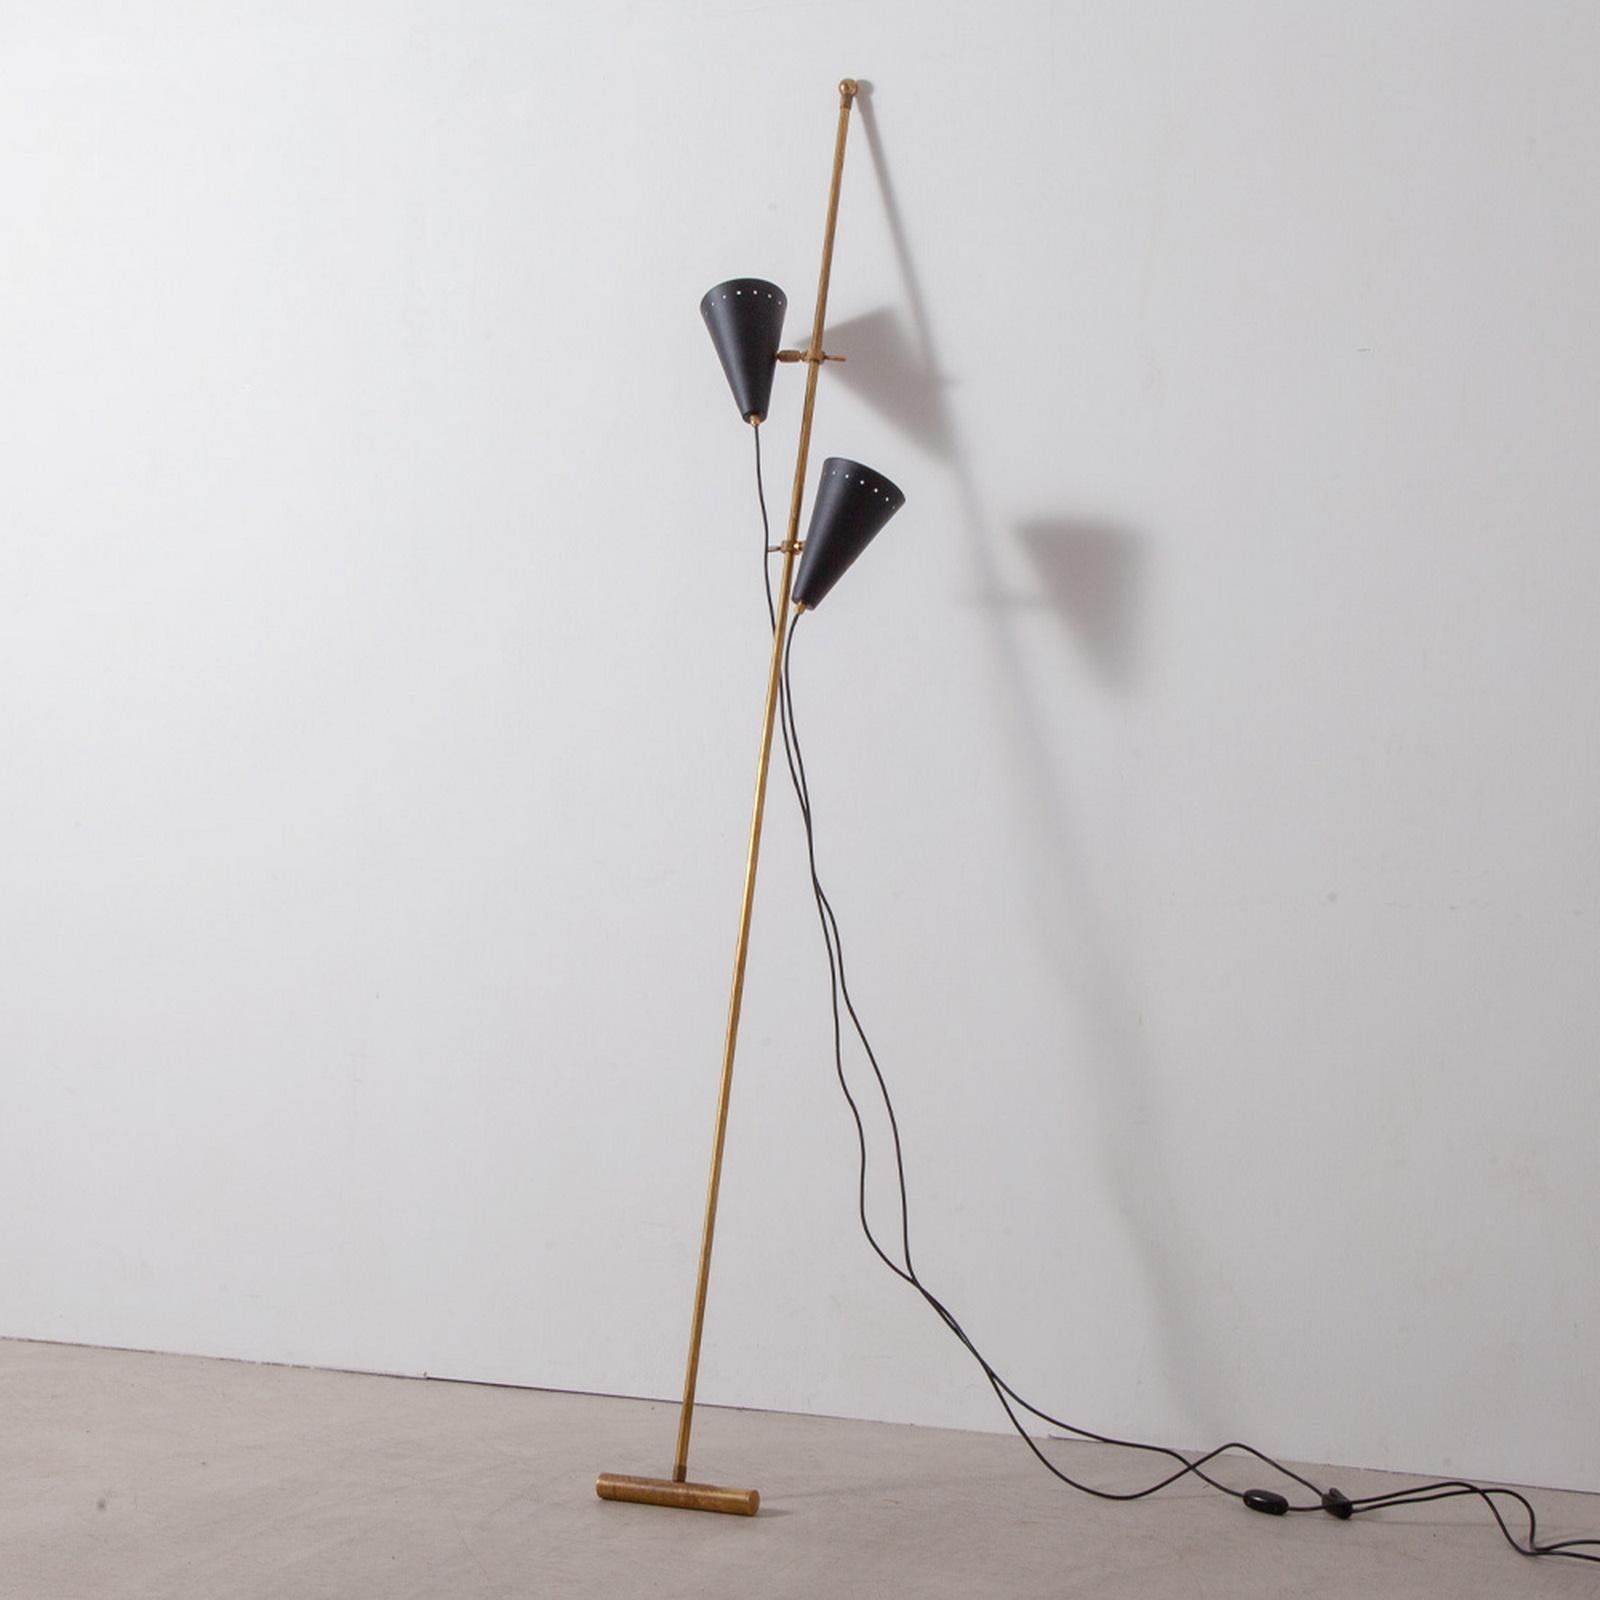 Minimalist Italian Mid-Century Style Wall Leaning Floor Lamp Adjustable Shades
A leaning on wall floor lamp from Italy.
The two shades are movable, and the position and angle can be adjusted.
Two Switches
Standard delivery with E14 base x 2 (light